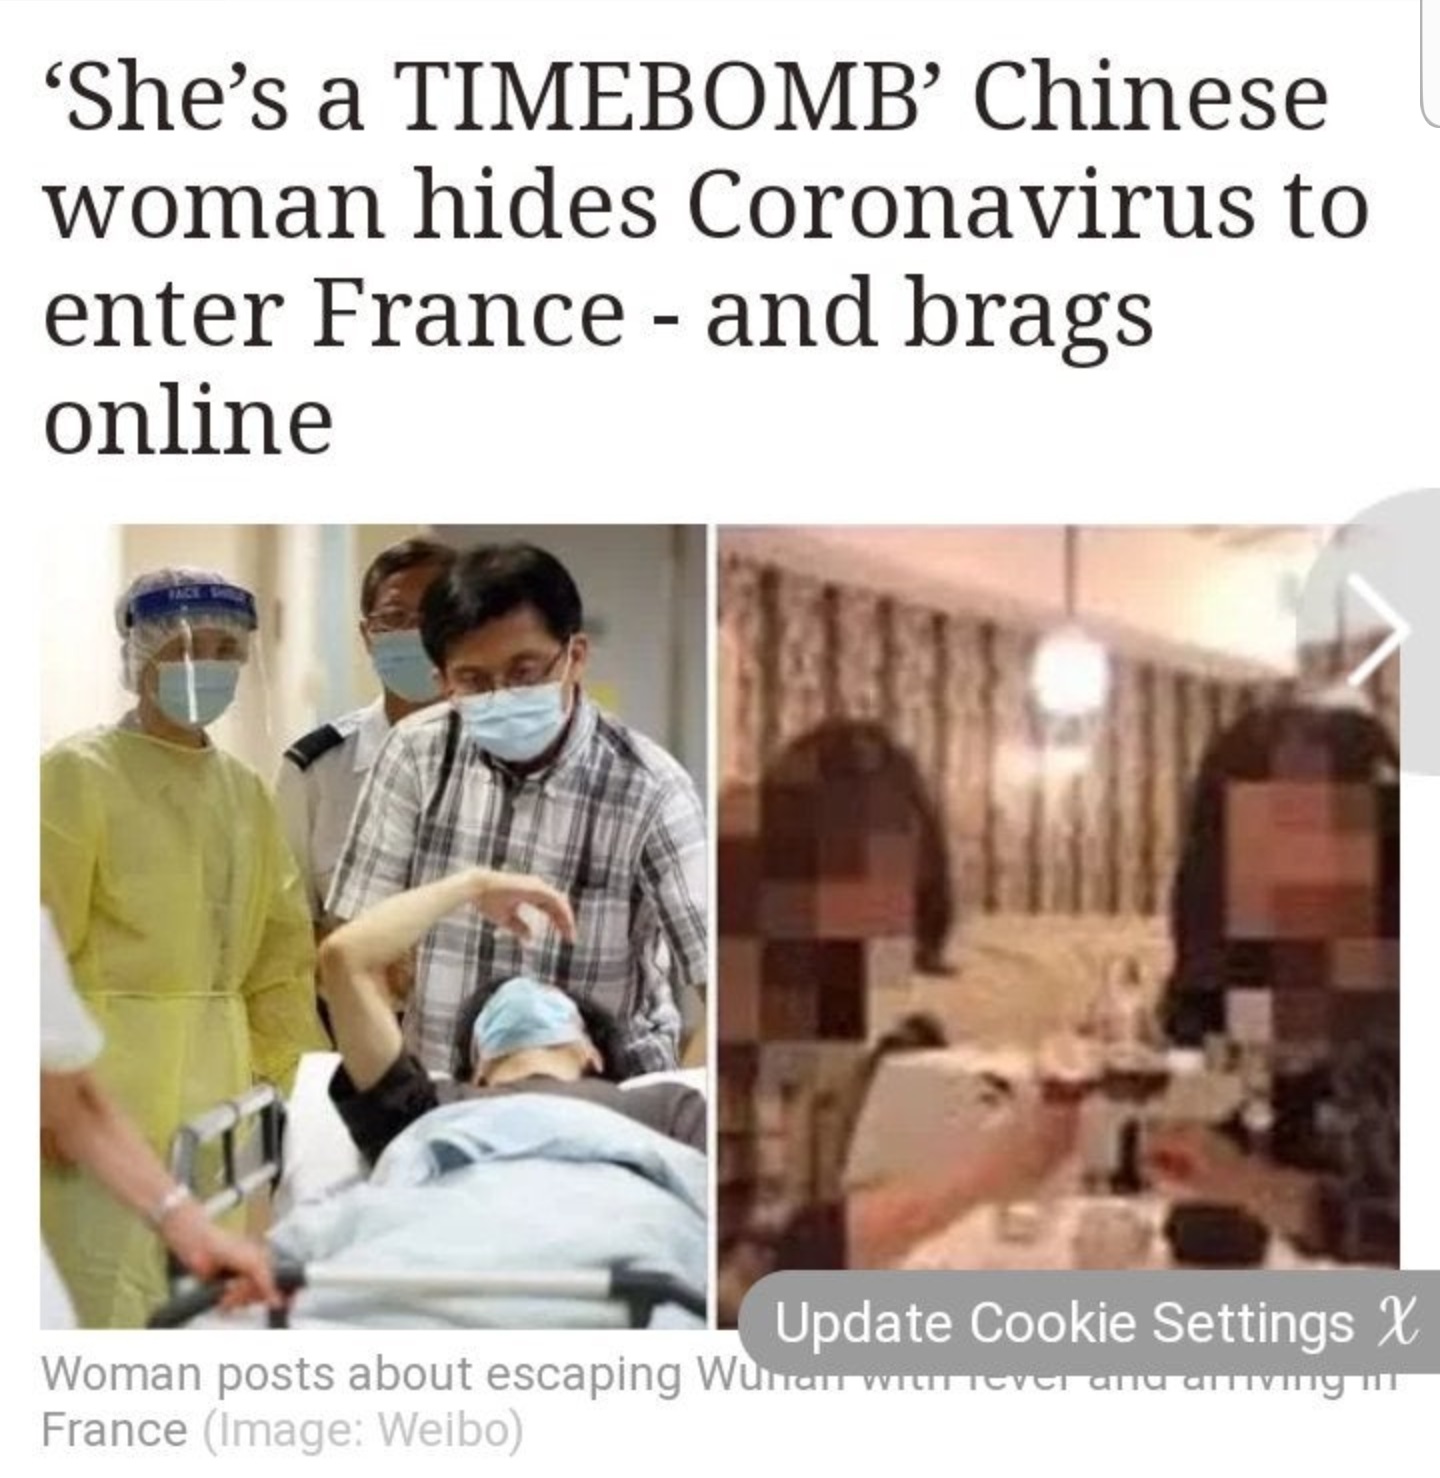 you hate someone everything they - 'She's a Timebomb Chinese woman hides Coronavirus to enter France and brags online Update Cookie Settings X Woman posts about escaping Wunal Wittevci anu mugur France Image Weibo